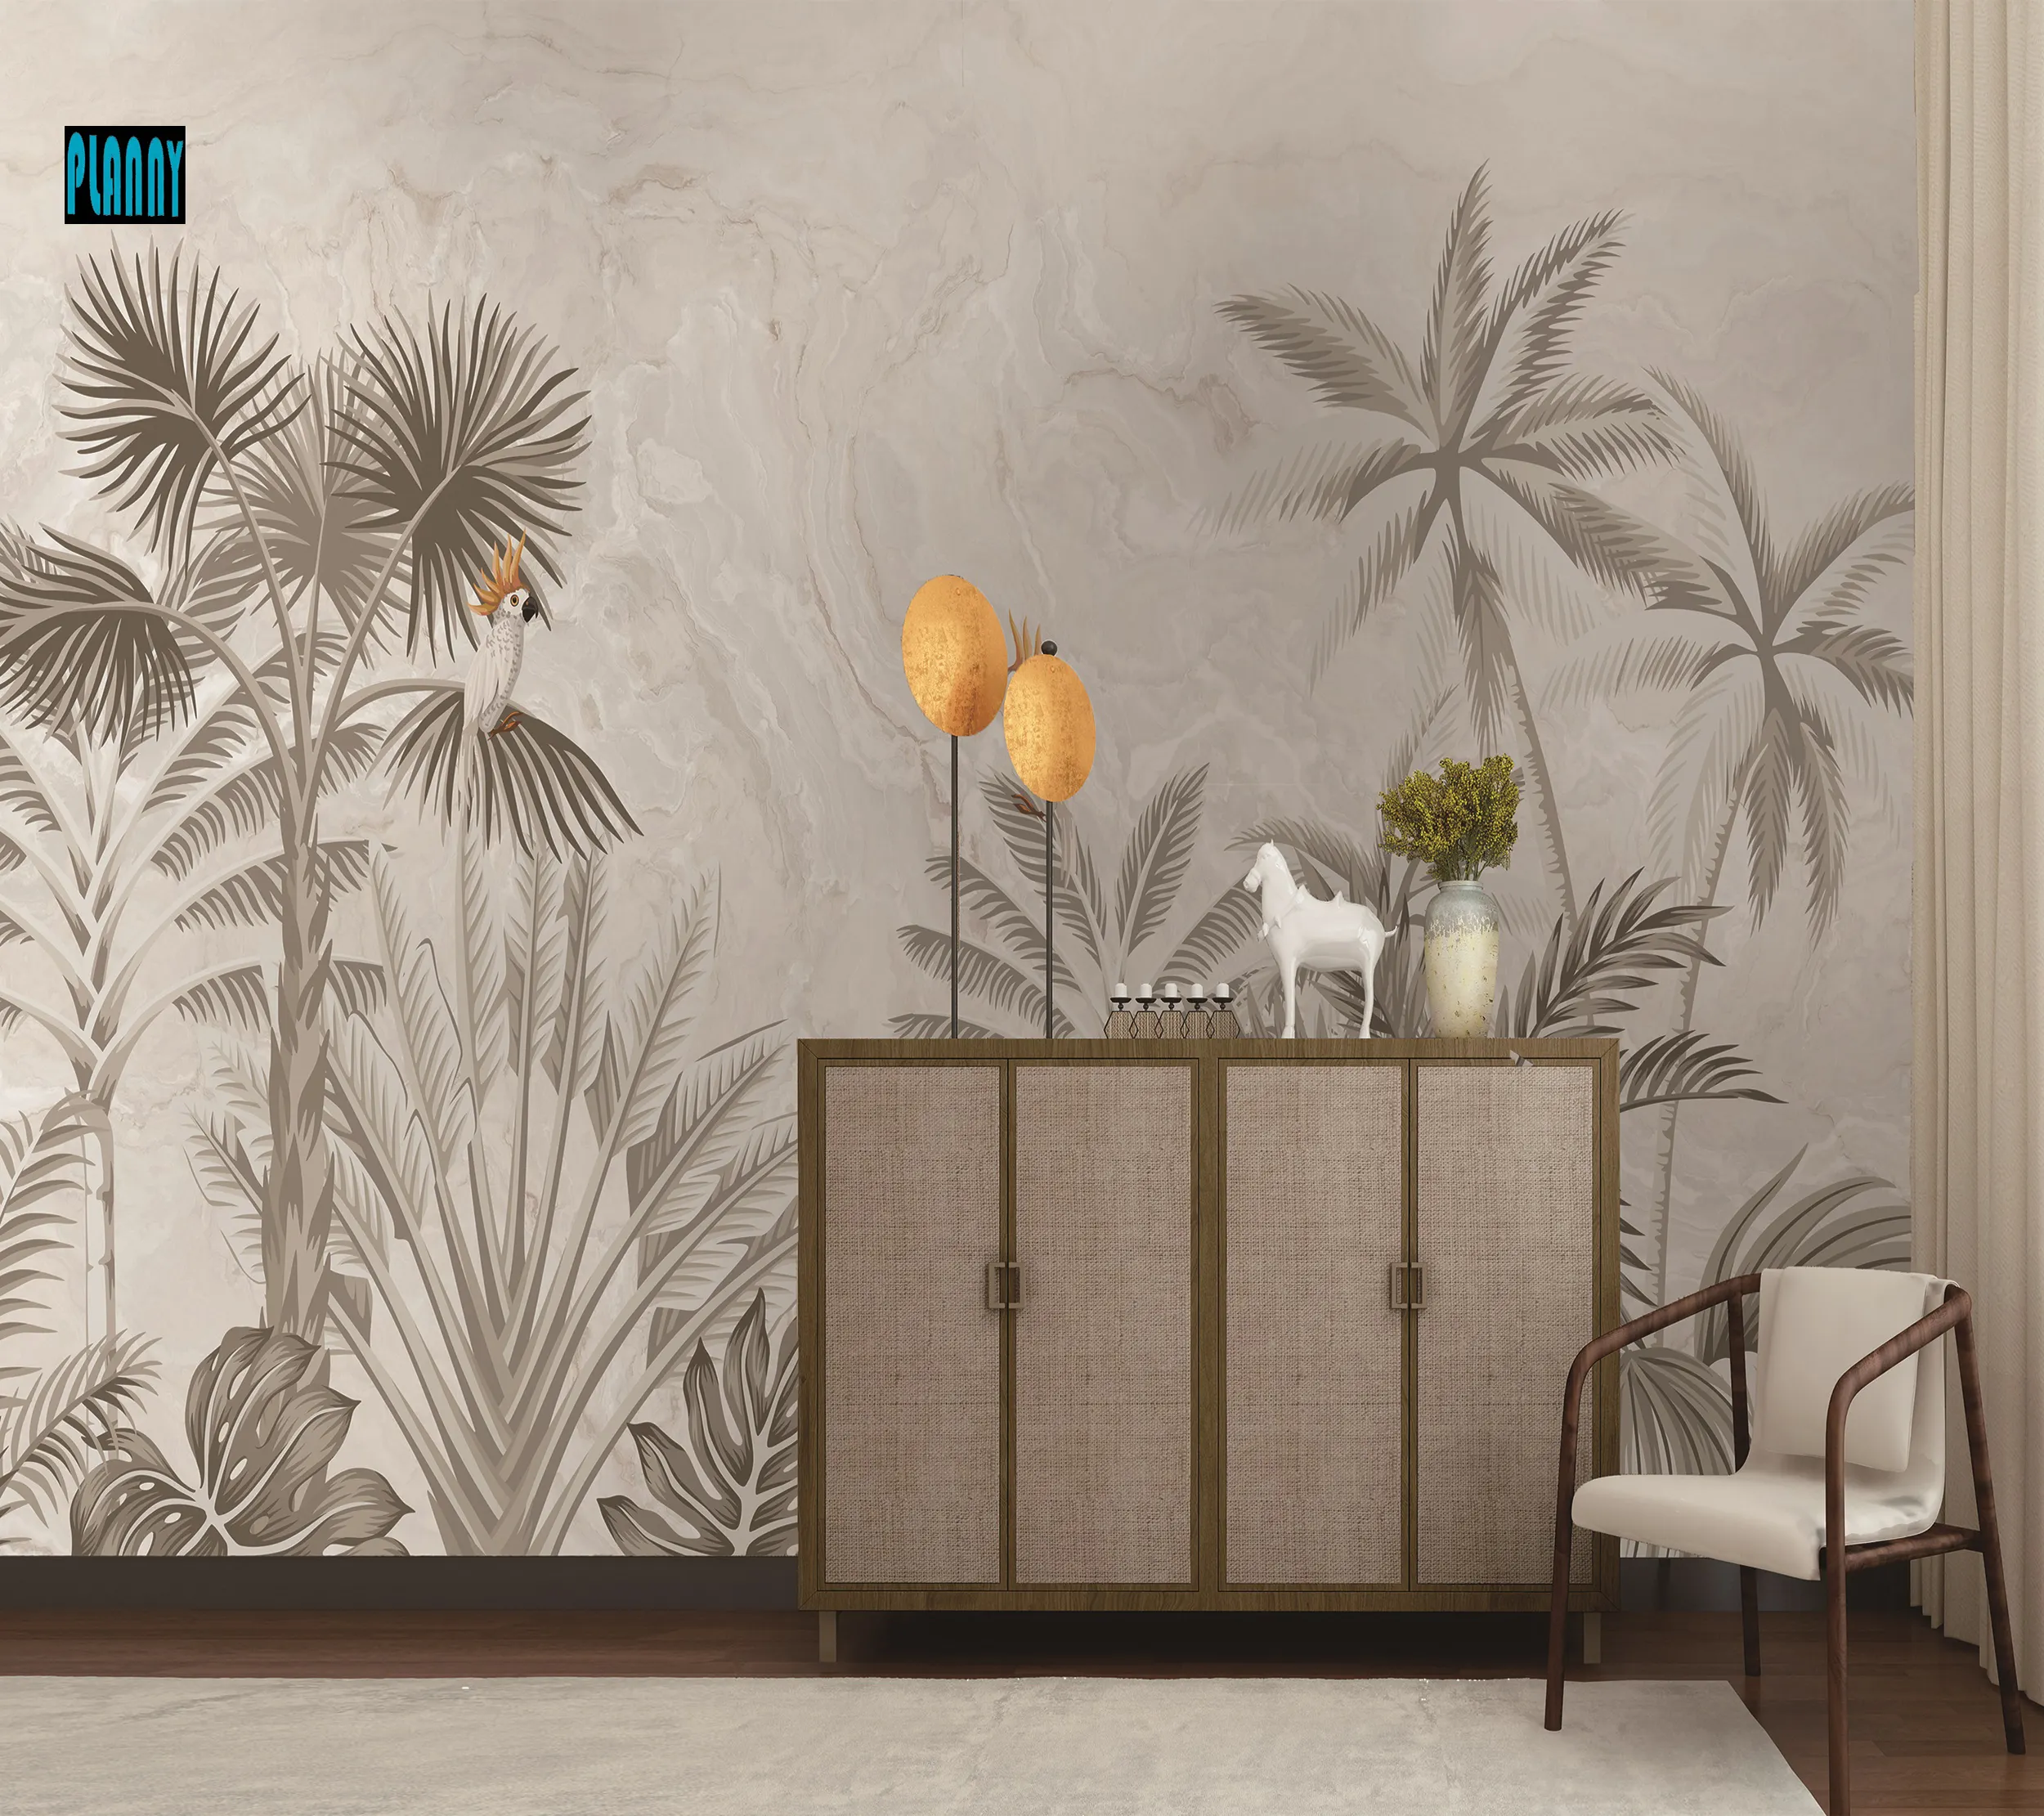 2022 New Design High quality mural wall paper tropical leisure popular fashion style